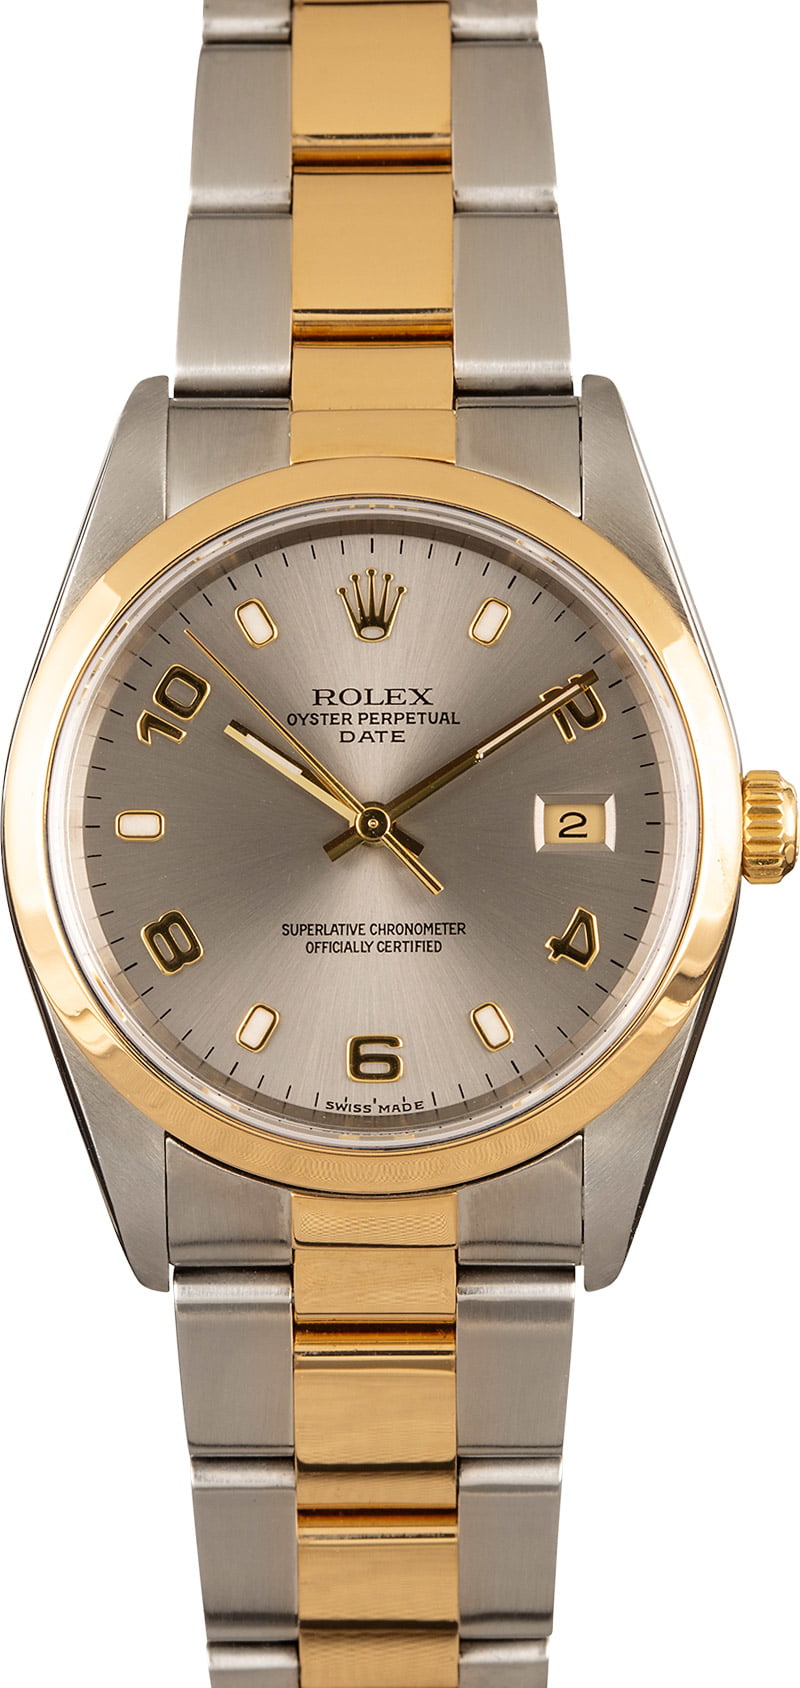 Buy Used Rolex 15203 | Bob's Watches